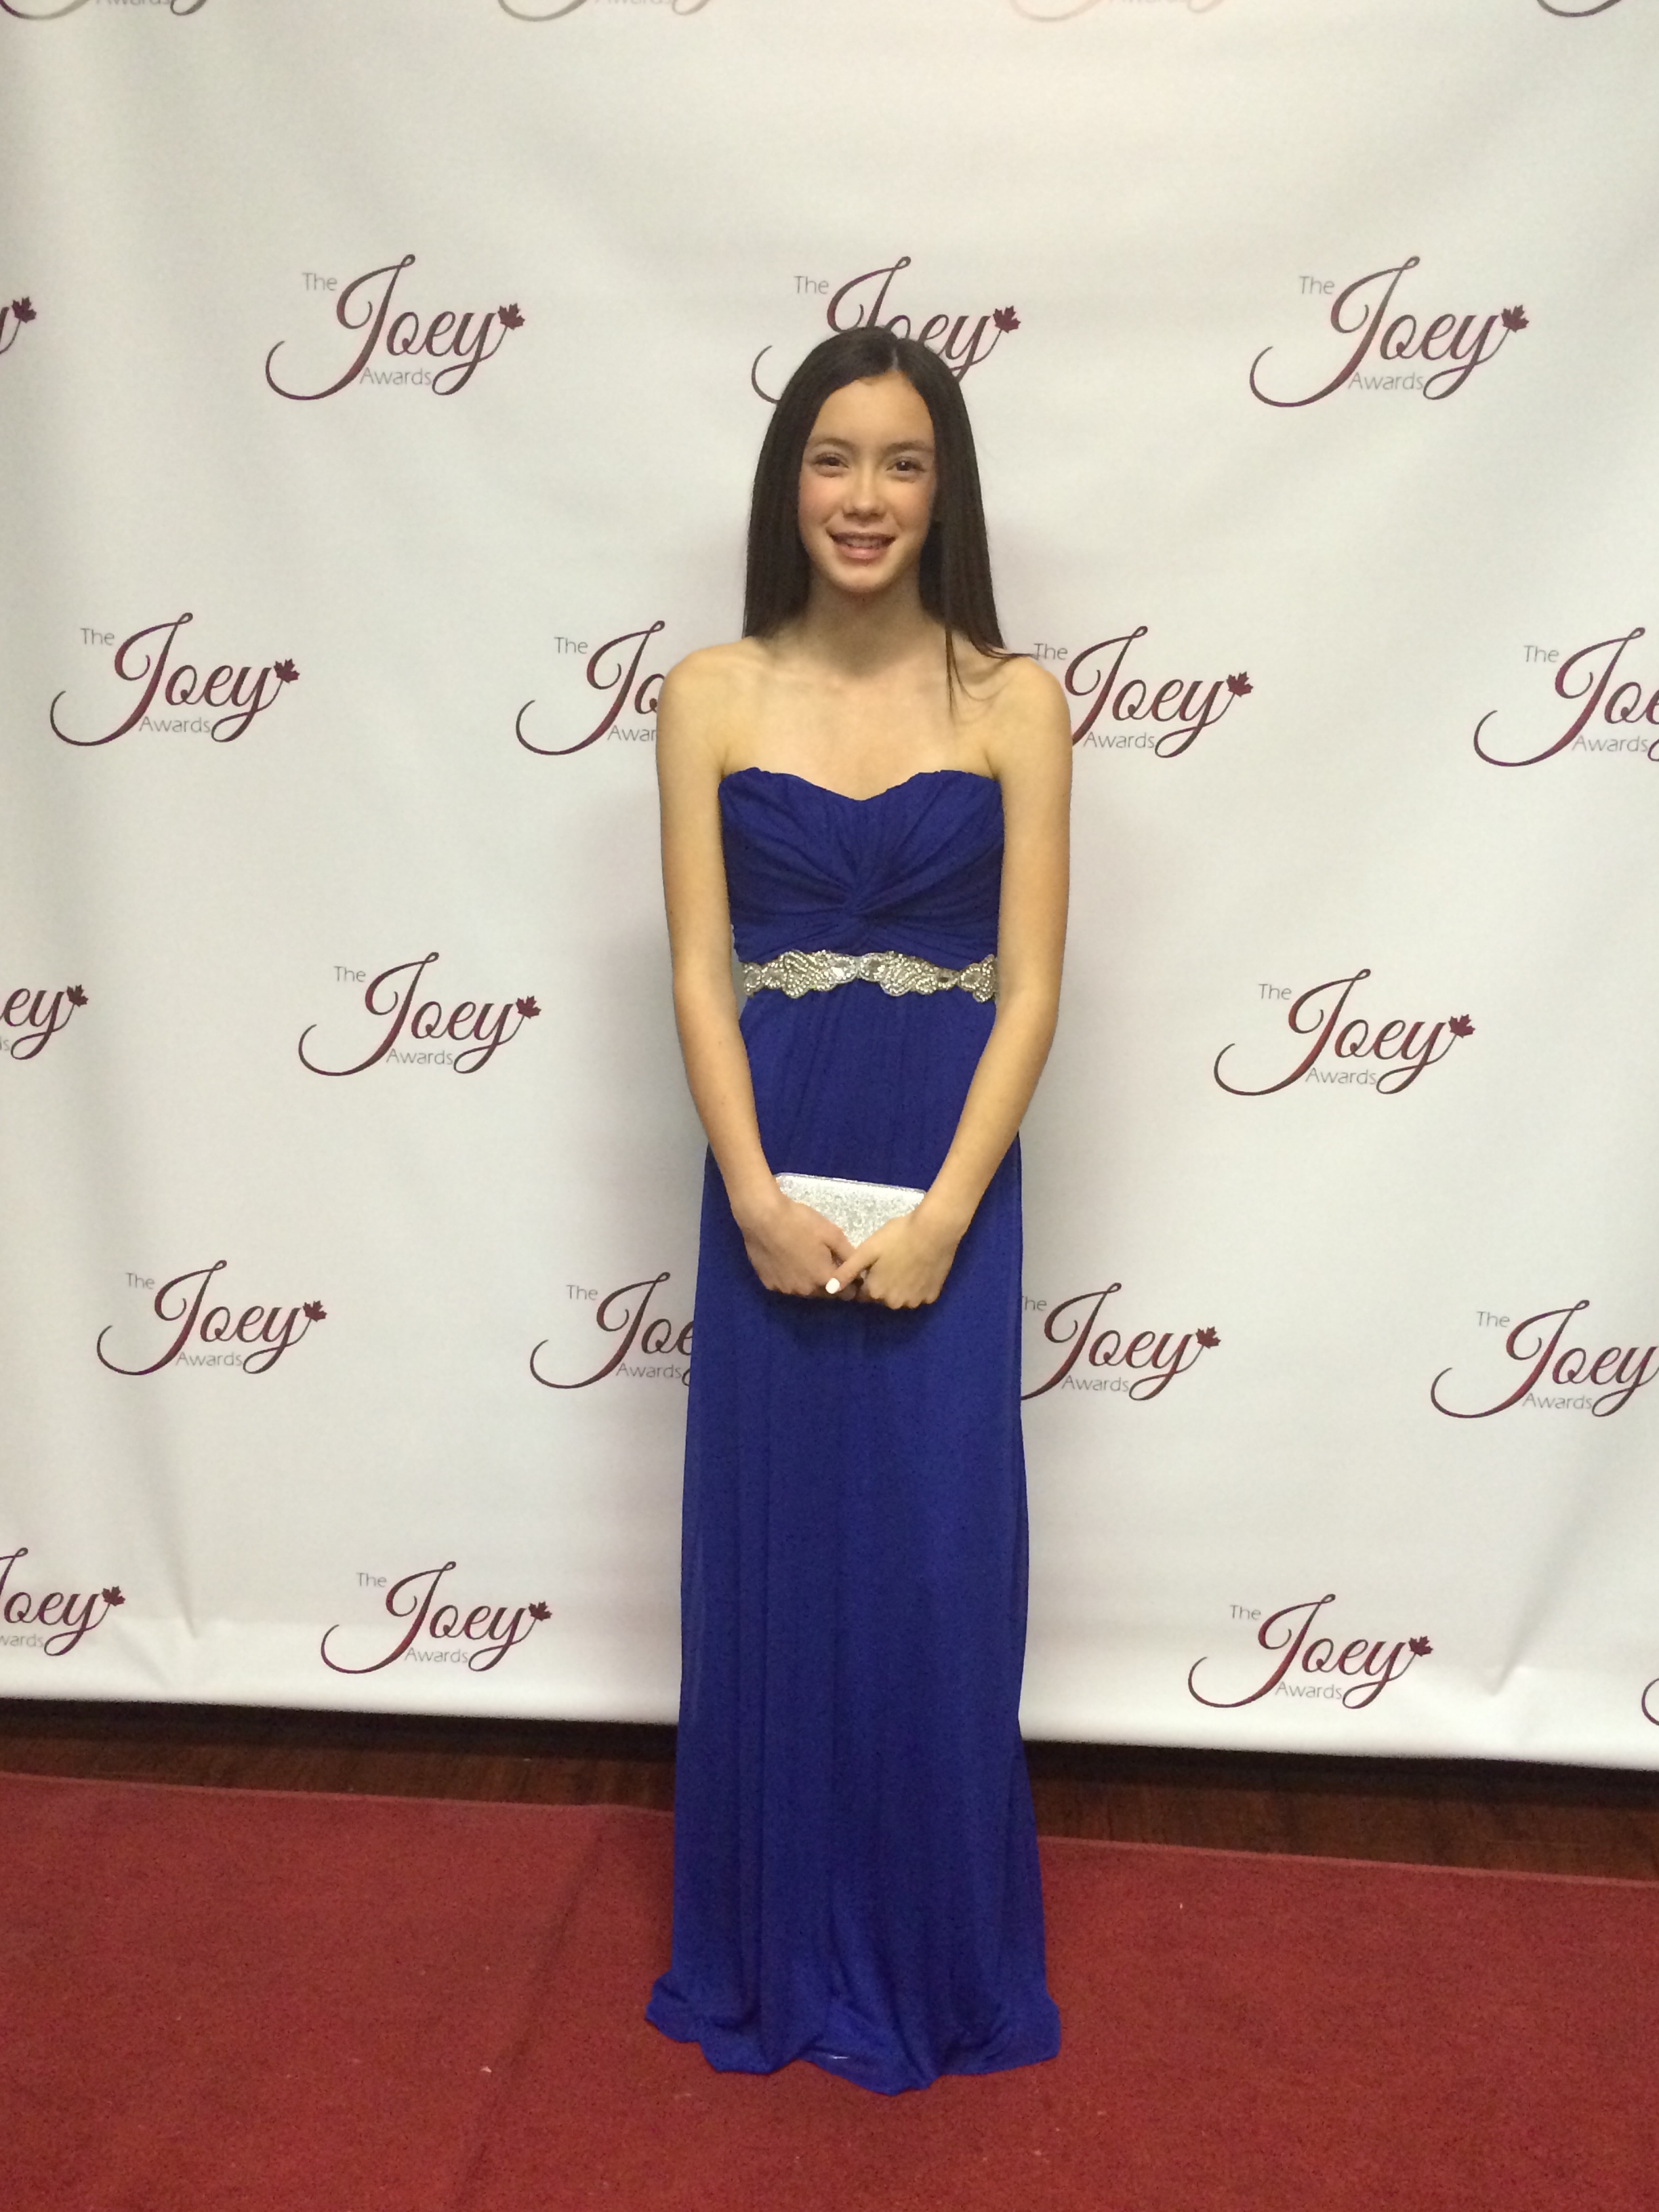 Canadian Young Performers Awards - The Joey Awards. Nominated for Lily in Euphoria Principal Actor, Feature Film